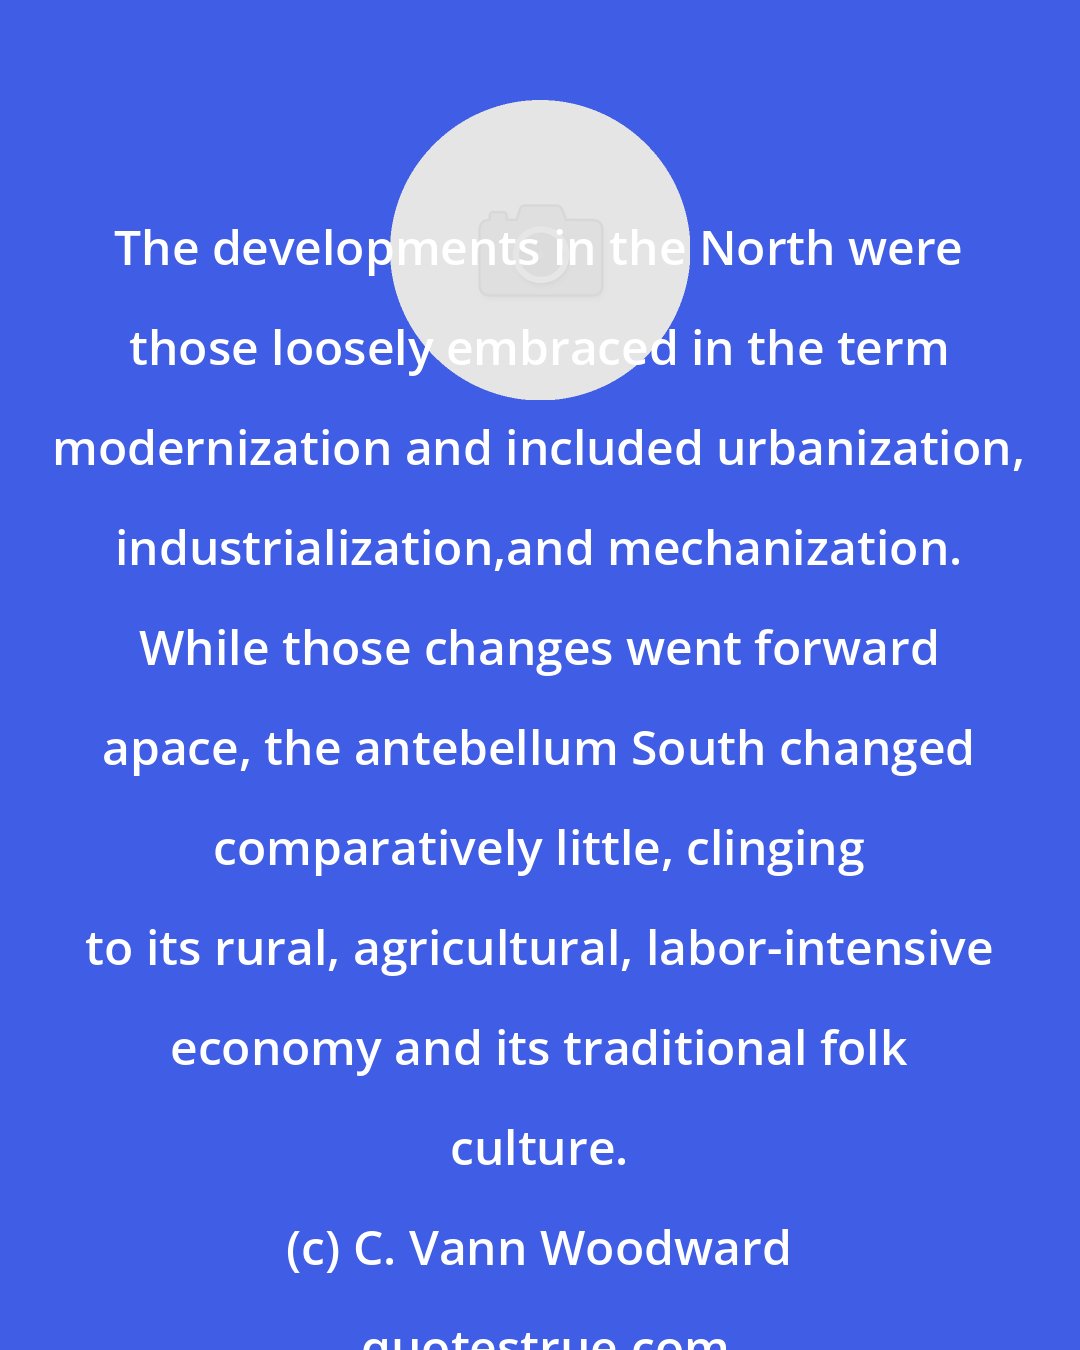 C. Vann Woodward: The developments in the North were those loosely embraced in the term modernization and included urbanization, industrialization,and mechanization. While those changes went forward apace, the antebellum South changed comparatively little, clinging to its rural, agricultural, labor-intensive economy and its traditional folk culture.